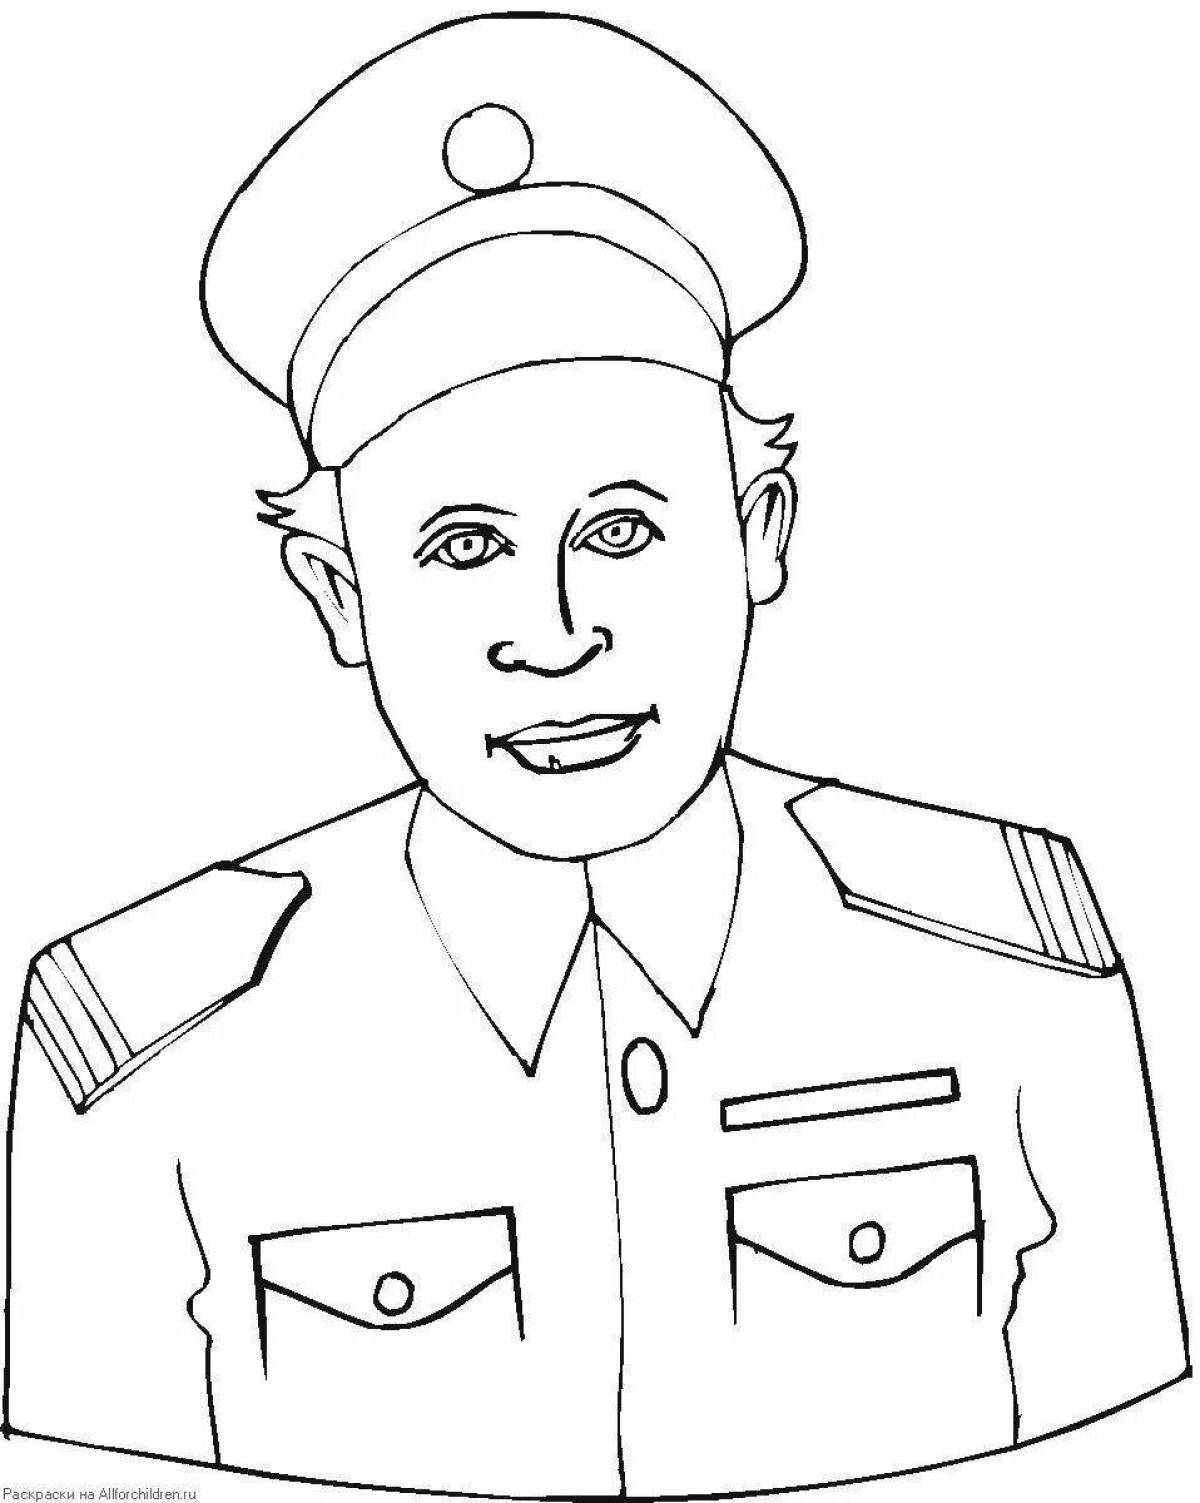 Coloring page energetic officer